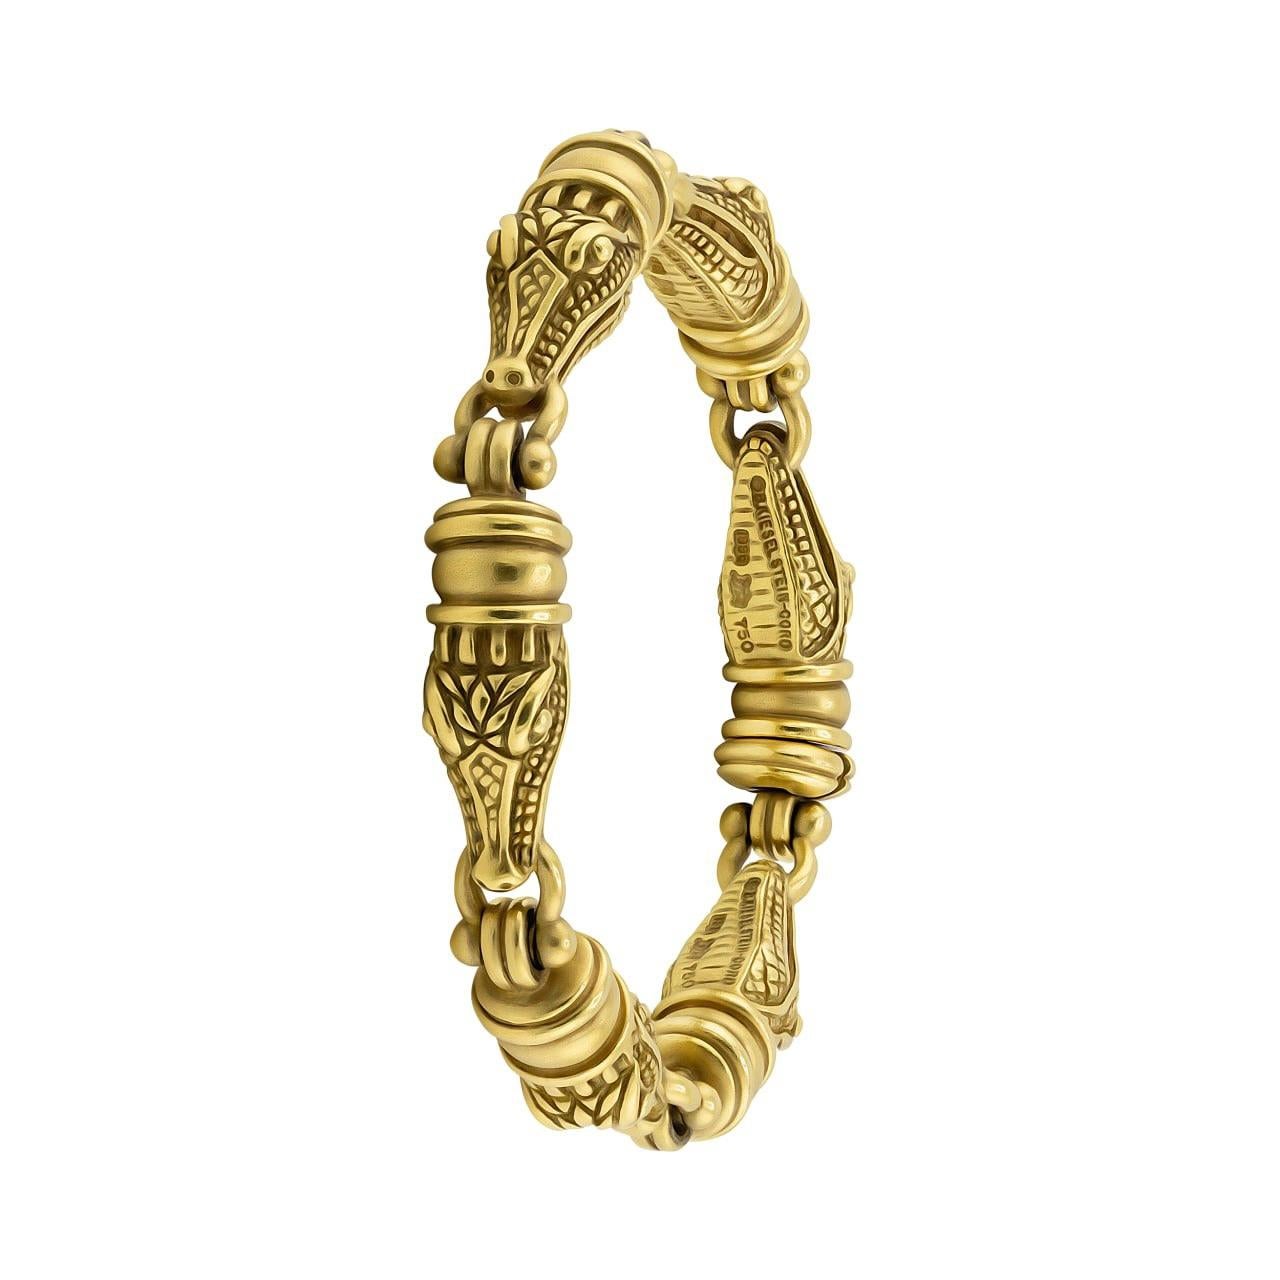 Barry Kieselstein-Cord 18K Yellow Gold Alligator Bracelet In Excellent Condition For Sale In North Miami Beach, FL